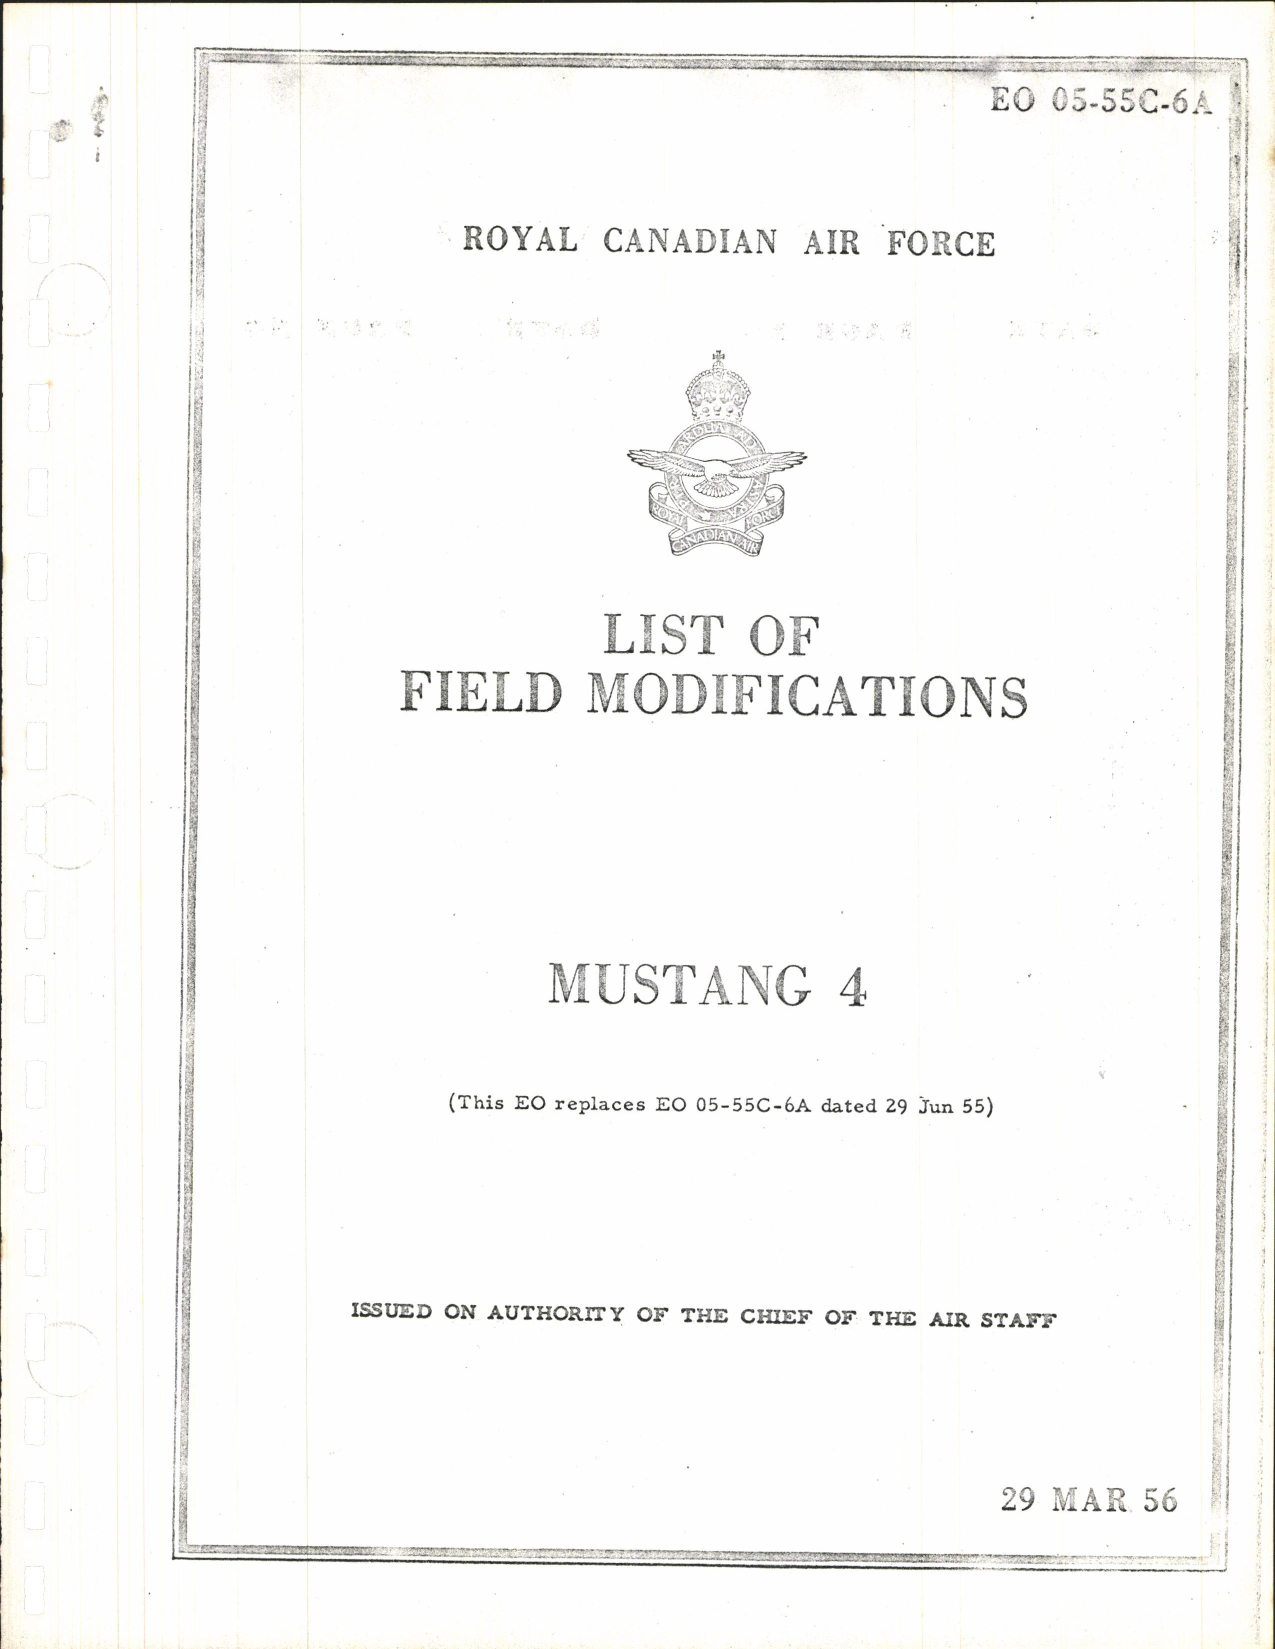 Sample page 1 from AirCorps Library document: List of Field Modifications for Mustang 4